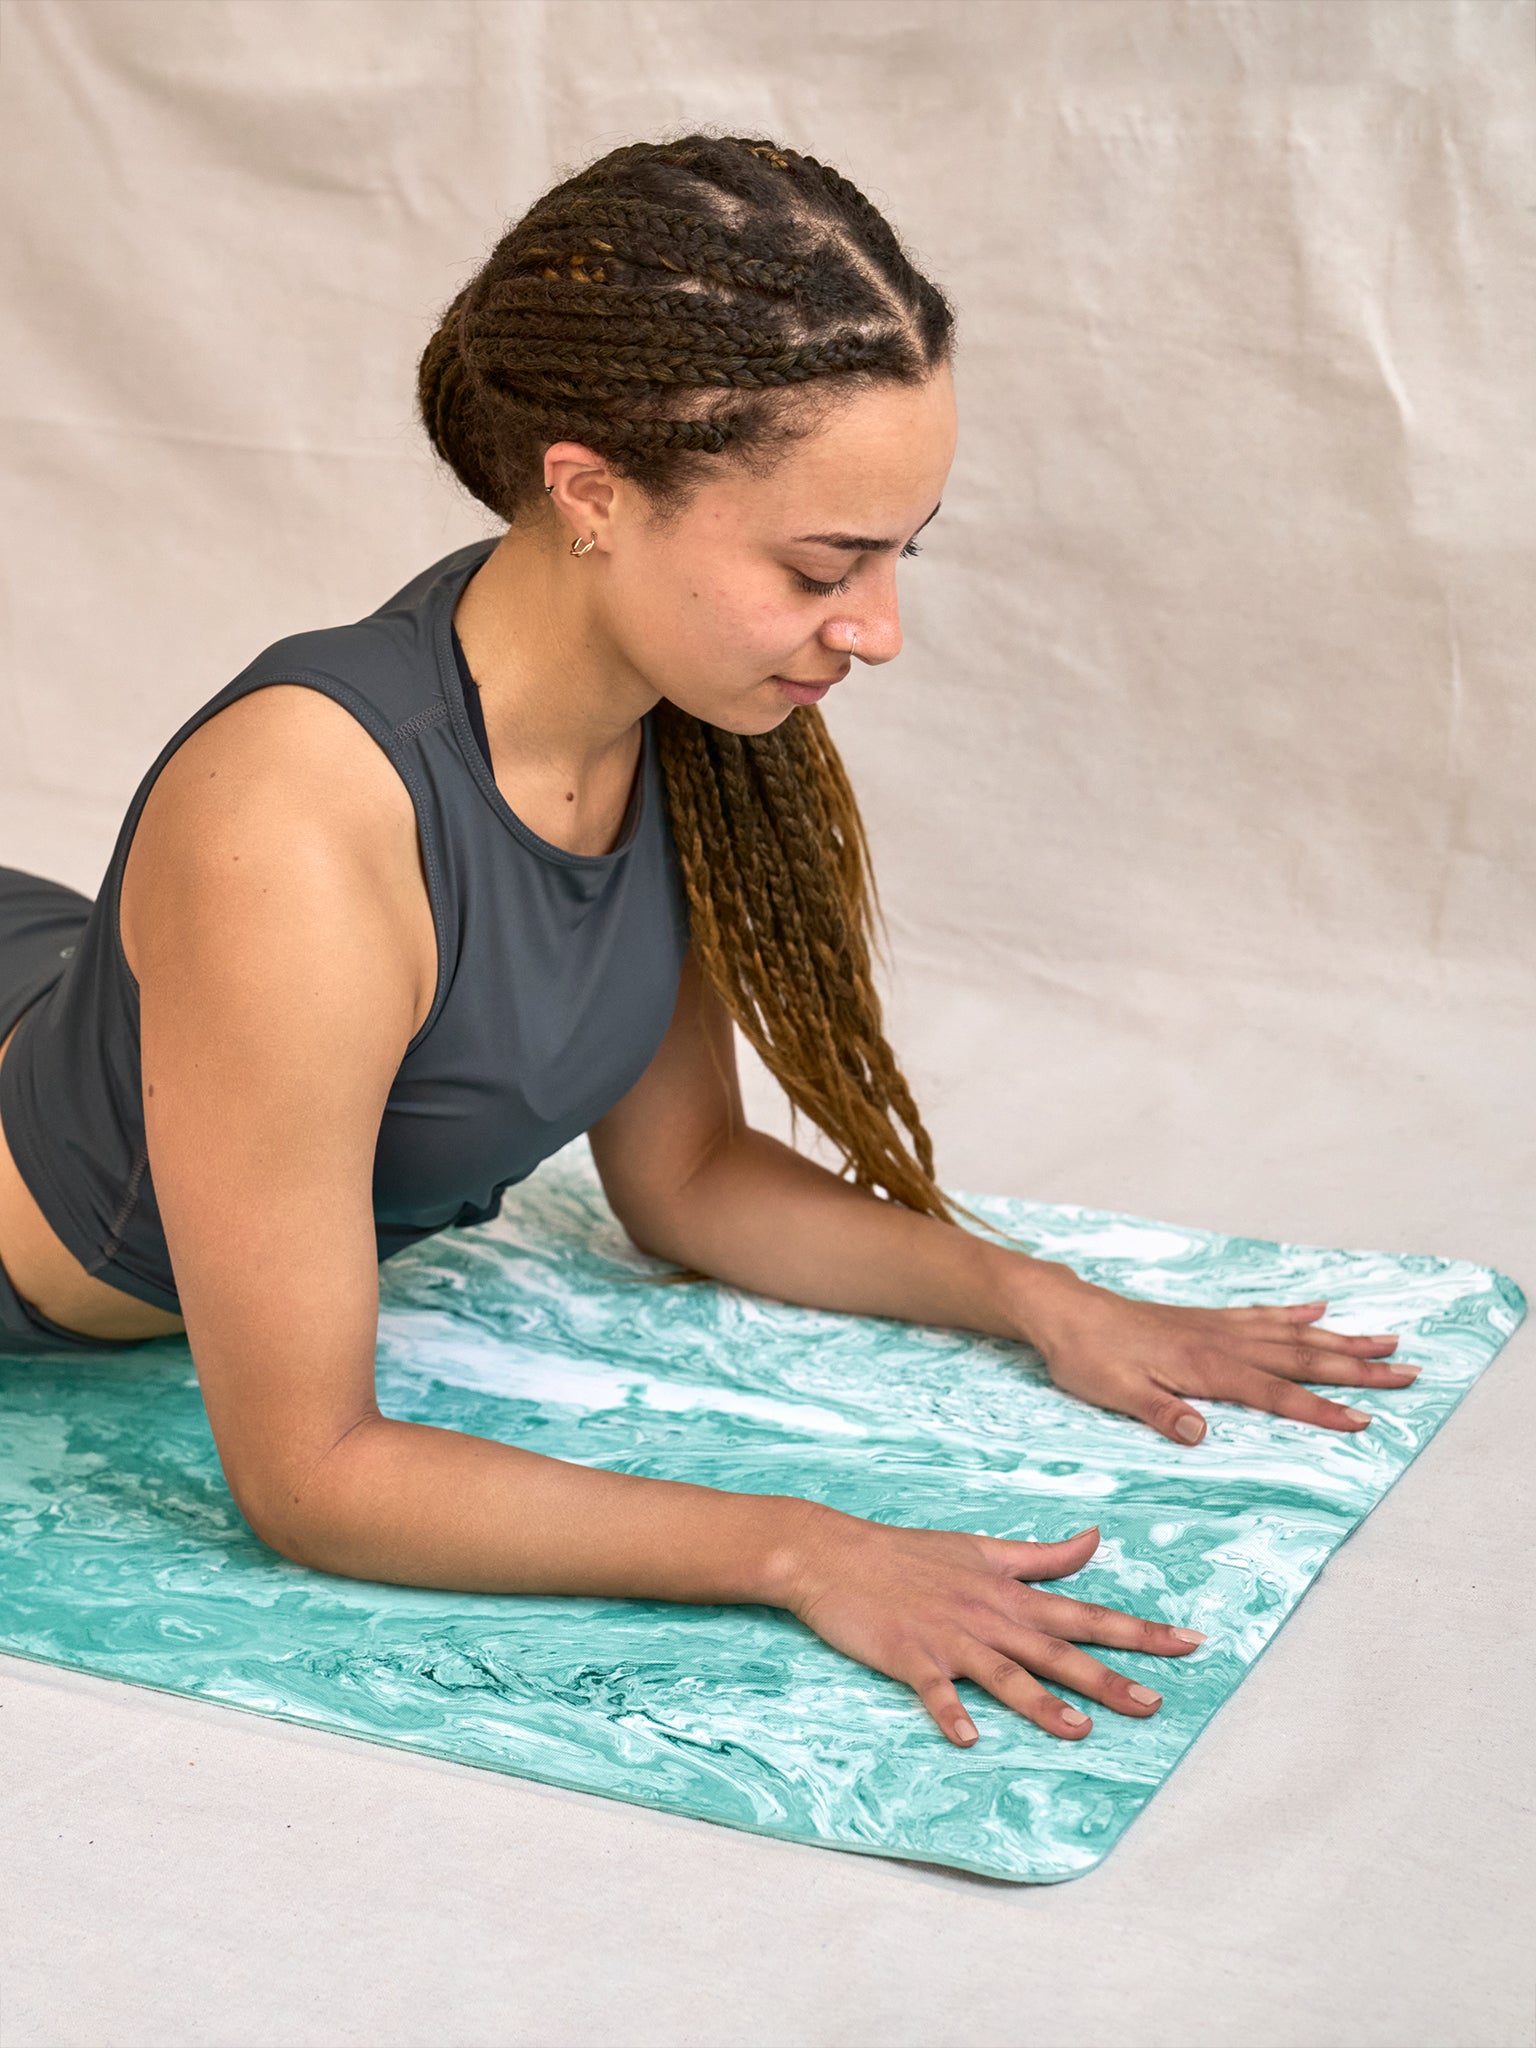 Woman practicing yoga on a turquoise marbled-pattern yoga mat, side angle view, fitness and wellness concept.